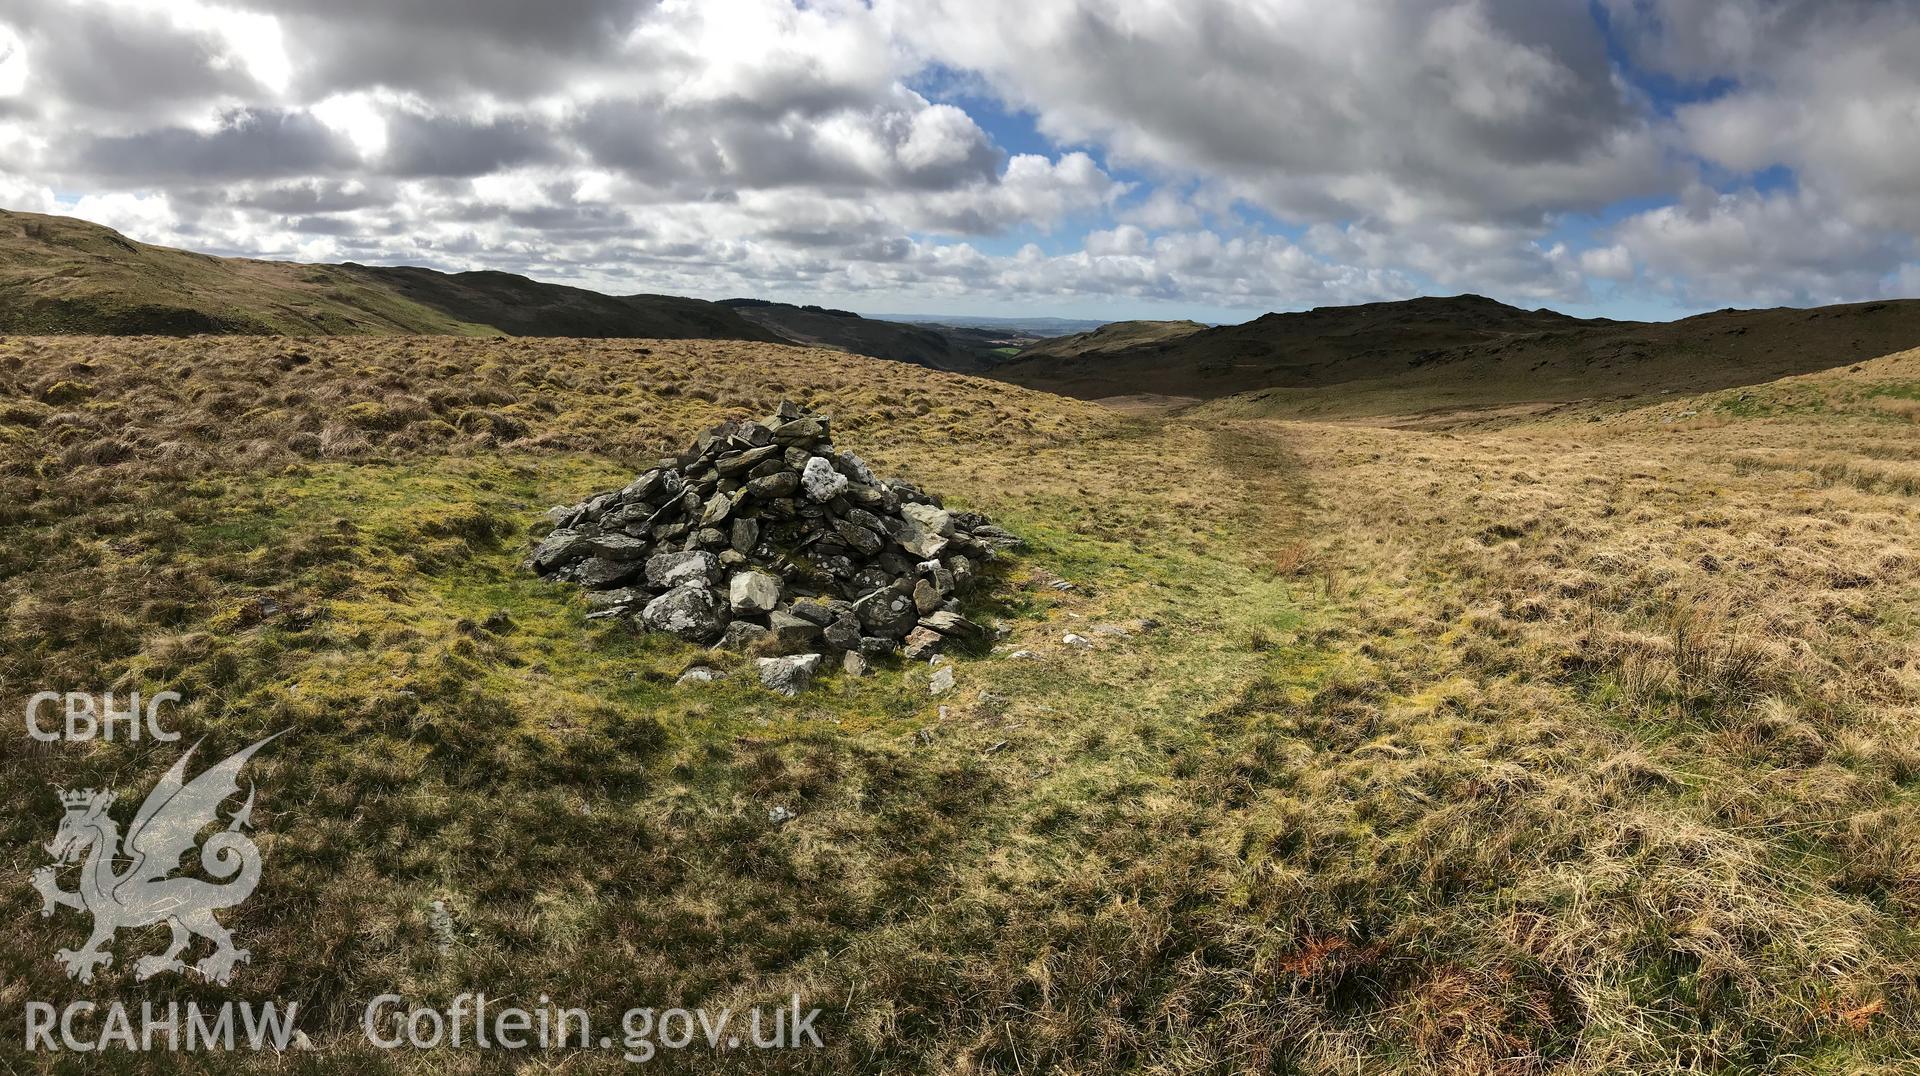 Colour photograph of Banc Blaenegnant round cairn, in the Cambrian Mountains east of Pontrhydfendigaid, taken by Paul R. Davis on 24th March 2019.